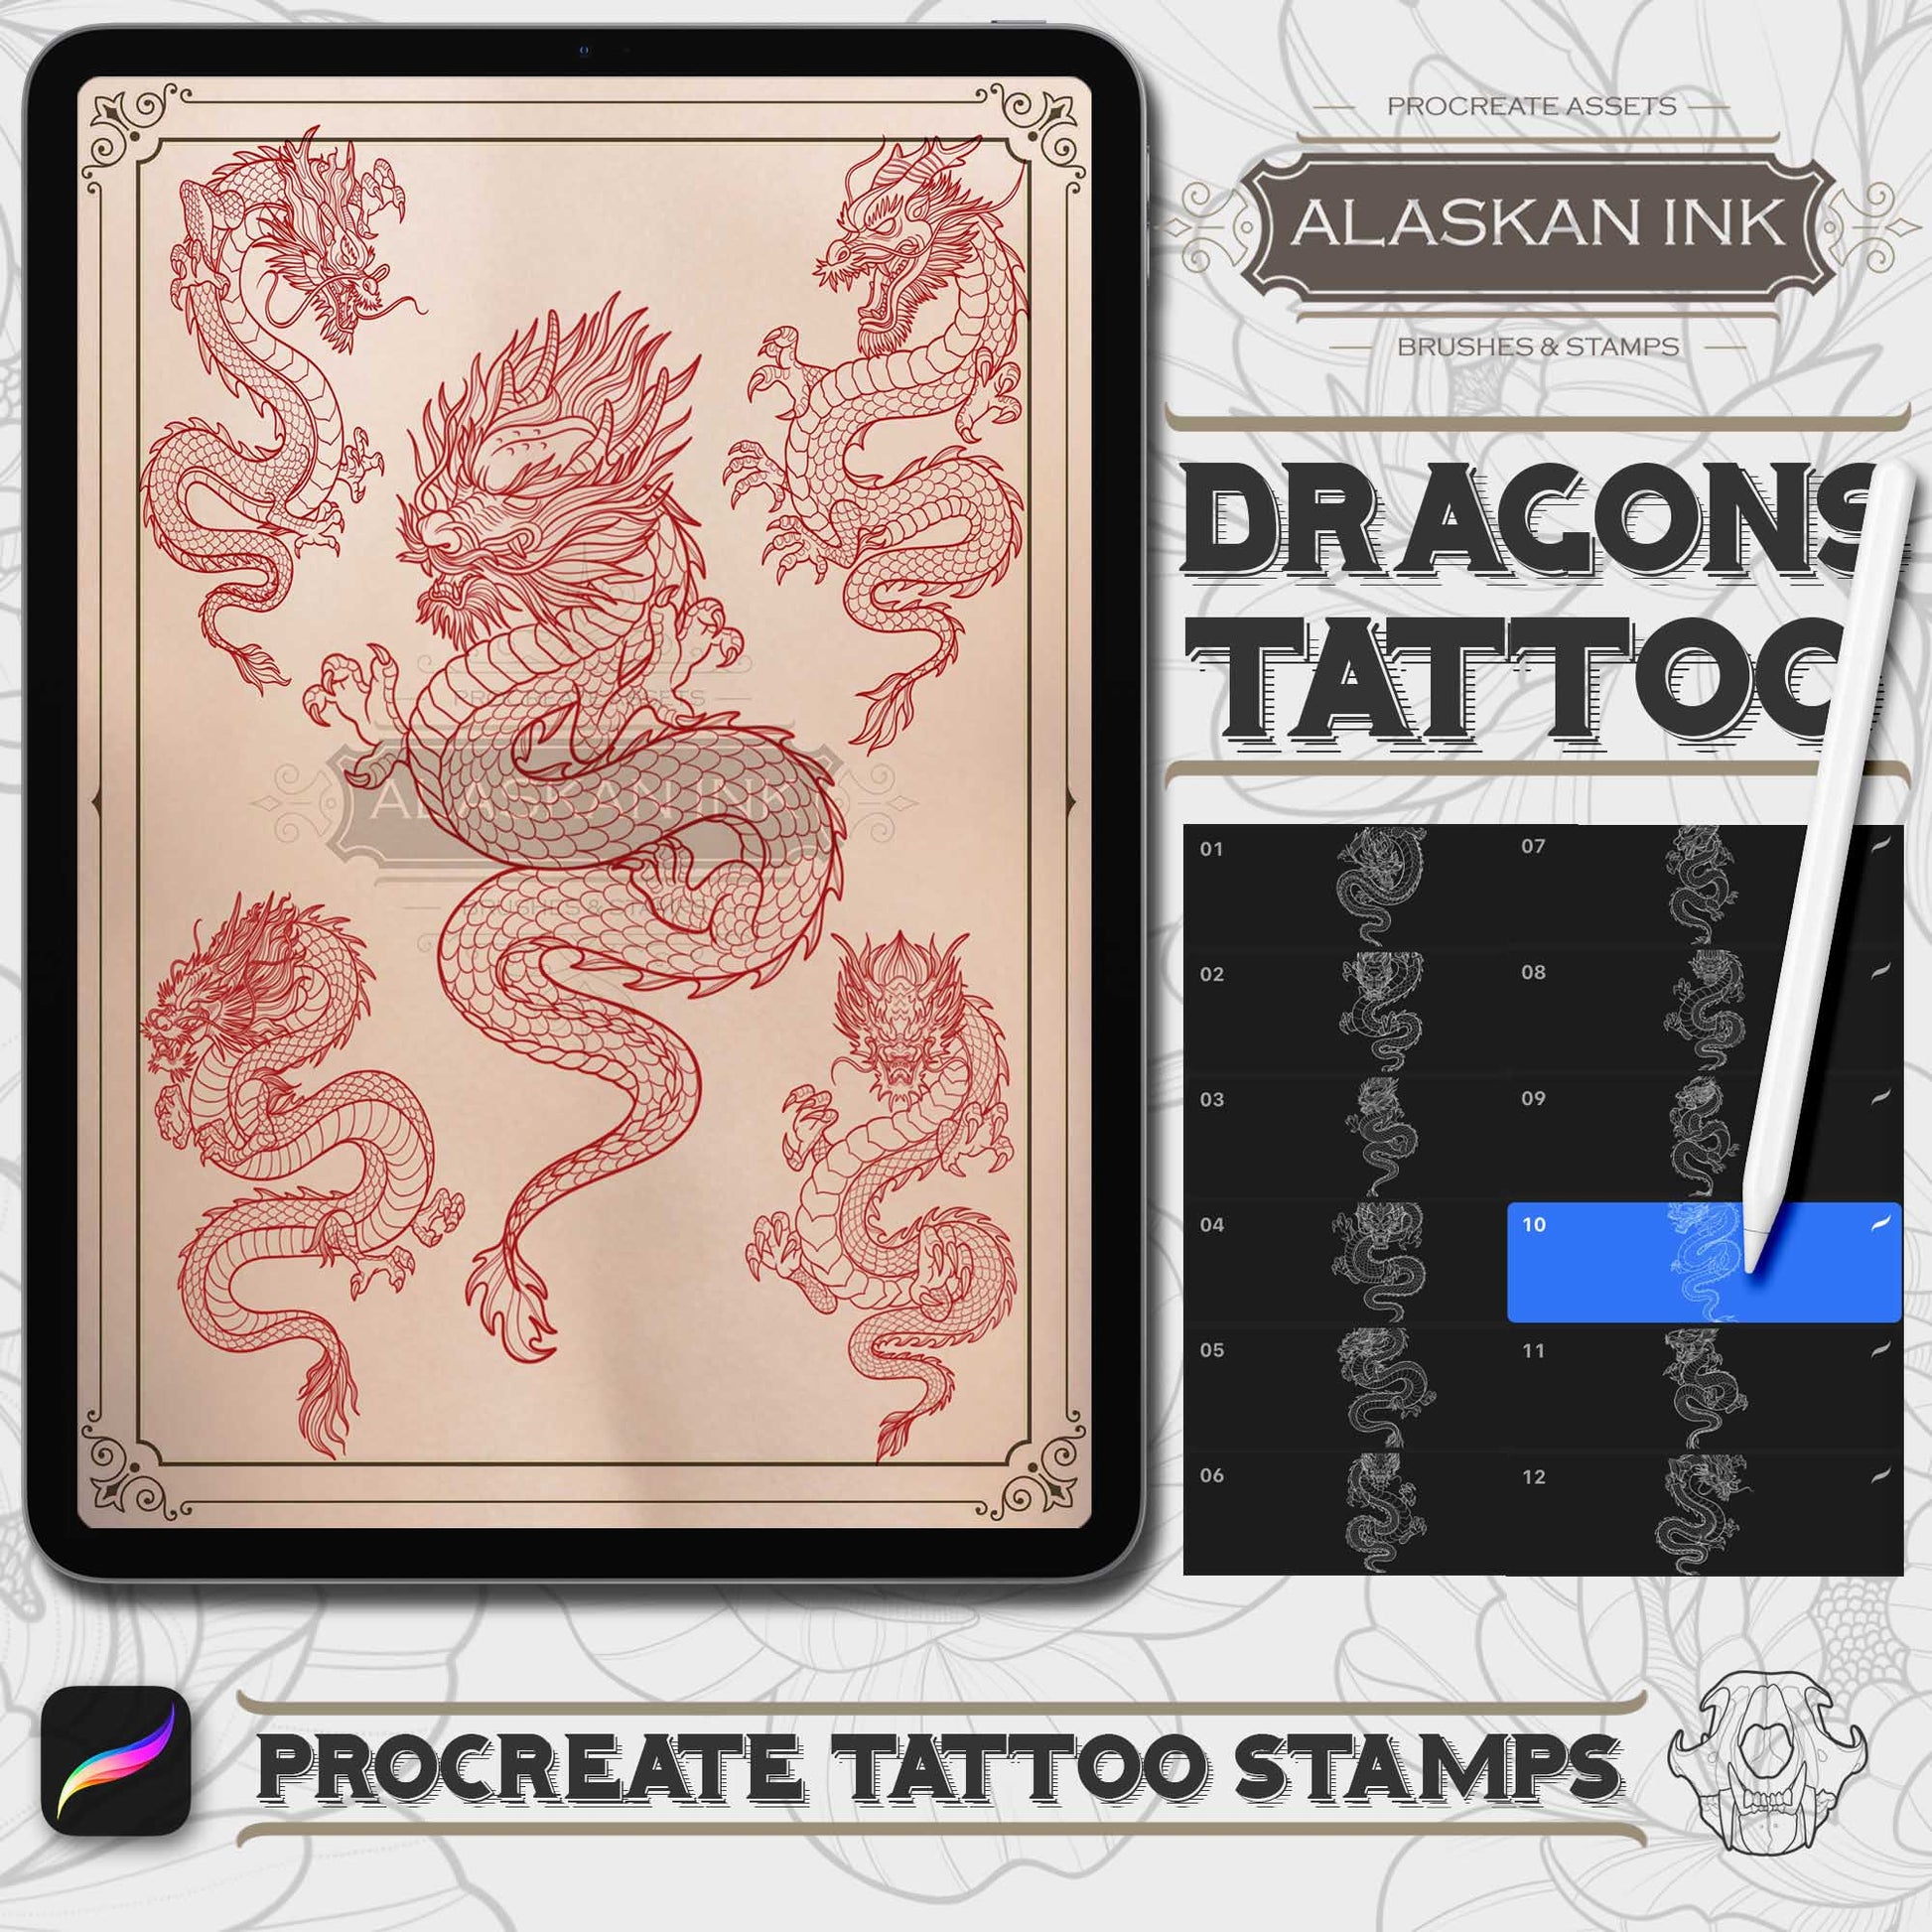 20 Dragon Tattoo Brushes & Stamps Volume 1 for Procreate application compatible with iPad and iPad pro